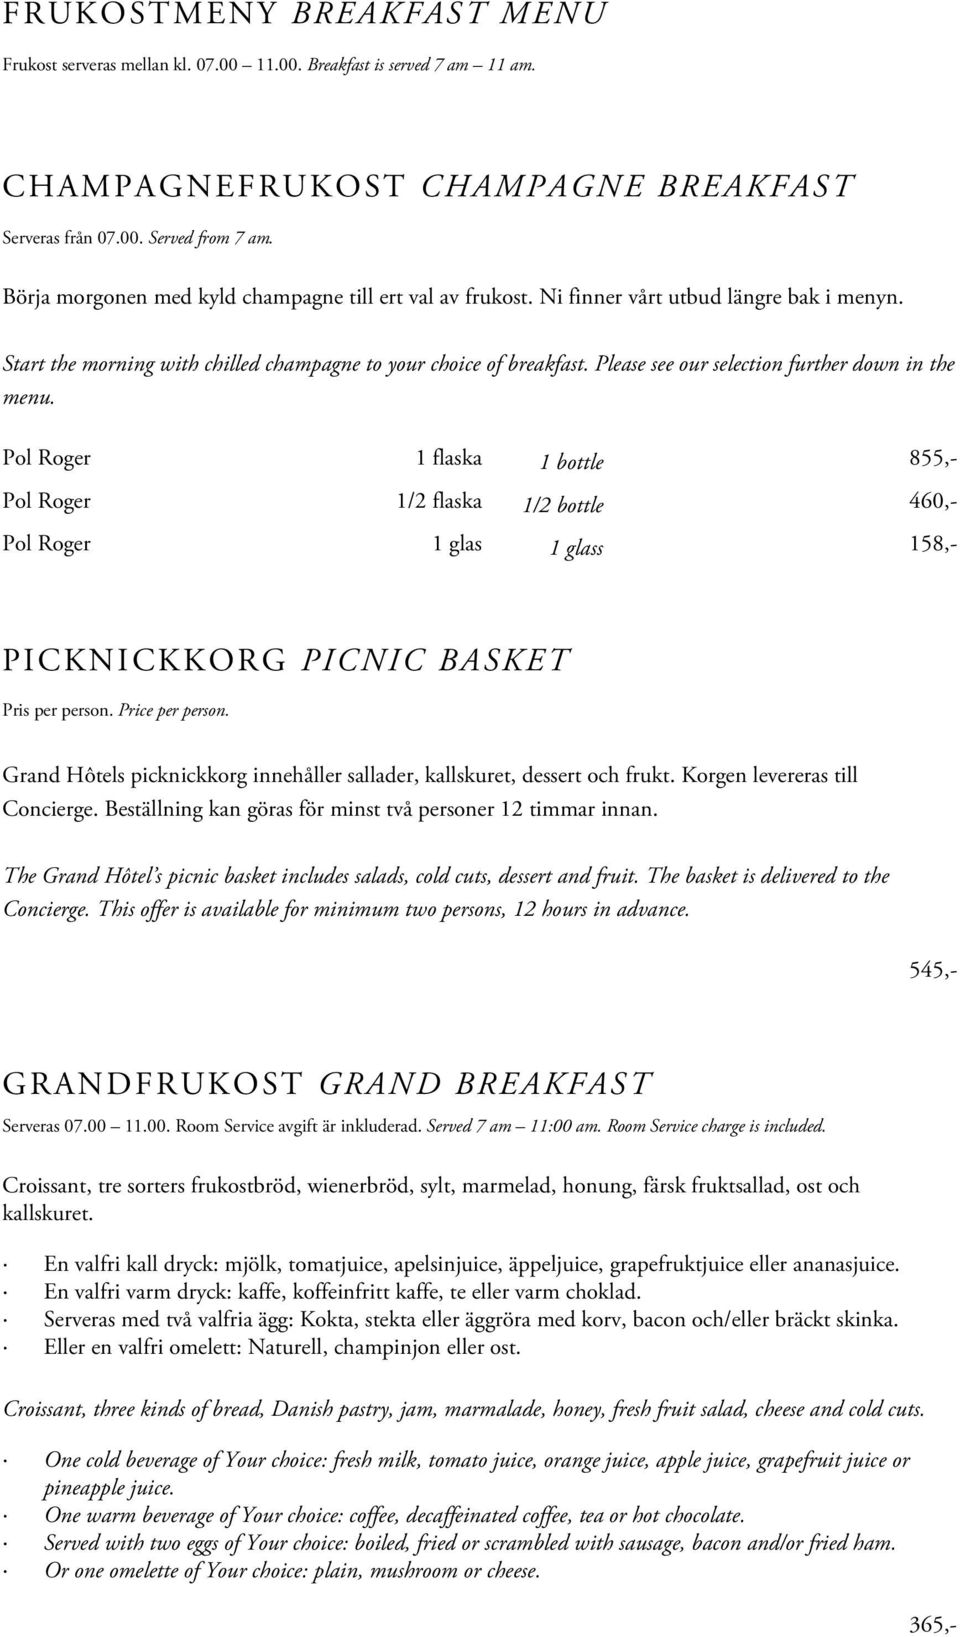 Please see our selection further down in the menu. Pol Roger 1 flaska 1 bottle 855,- Pol Roger 1/2 flaska 1/2 bottle 460,- Pol Roger 1 glas 1 glass 158,- PICKNICKKORG PICNIC BASKET Pris per person.